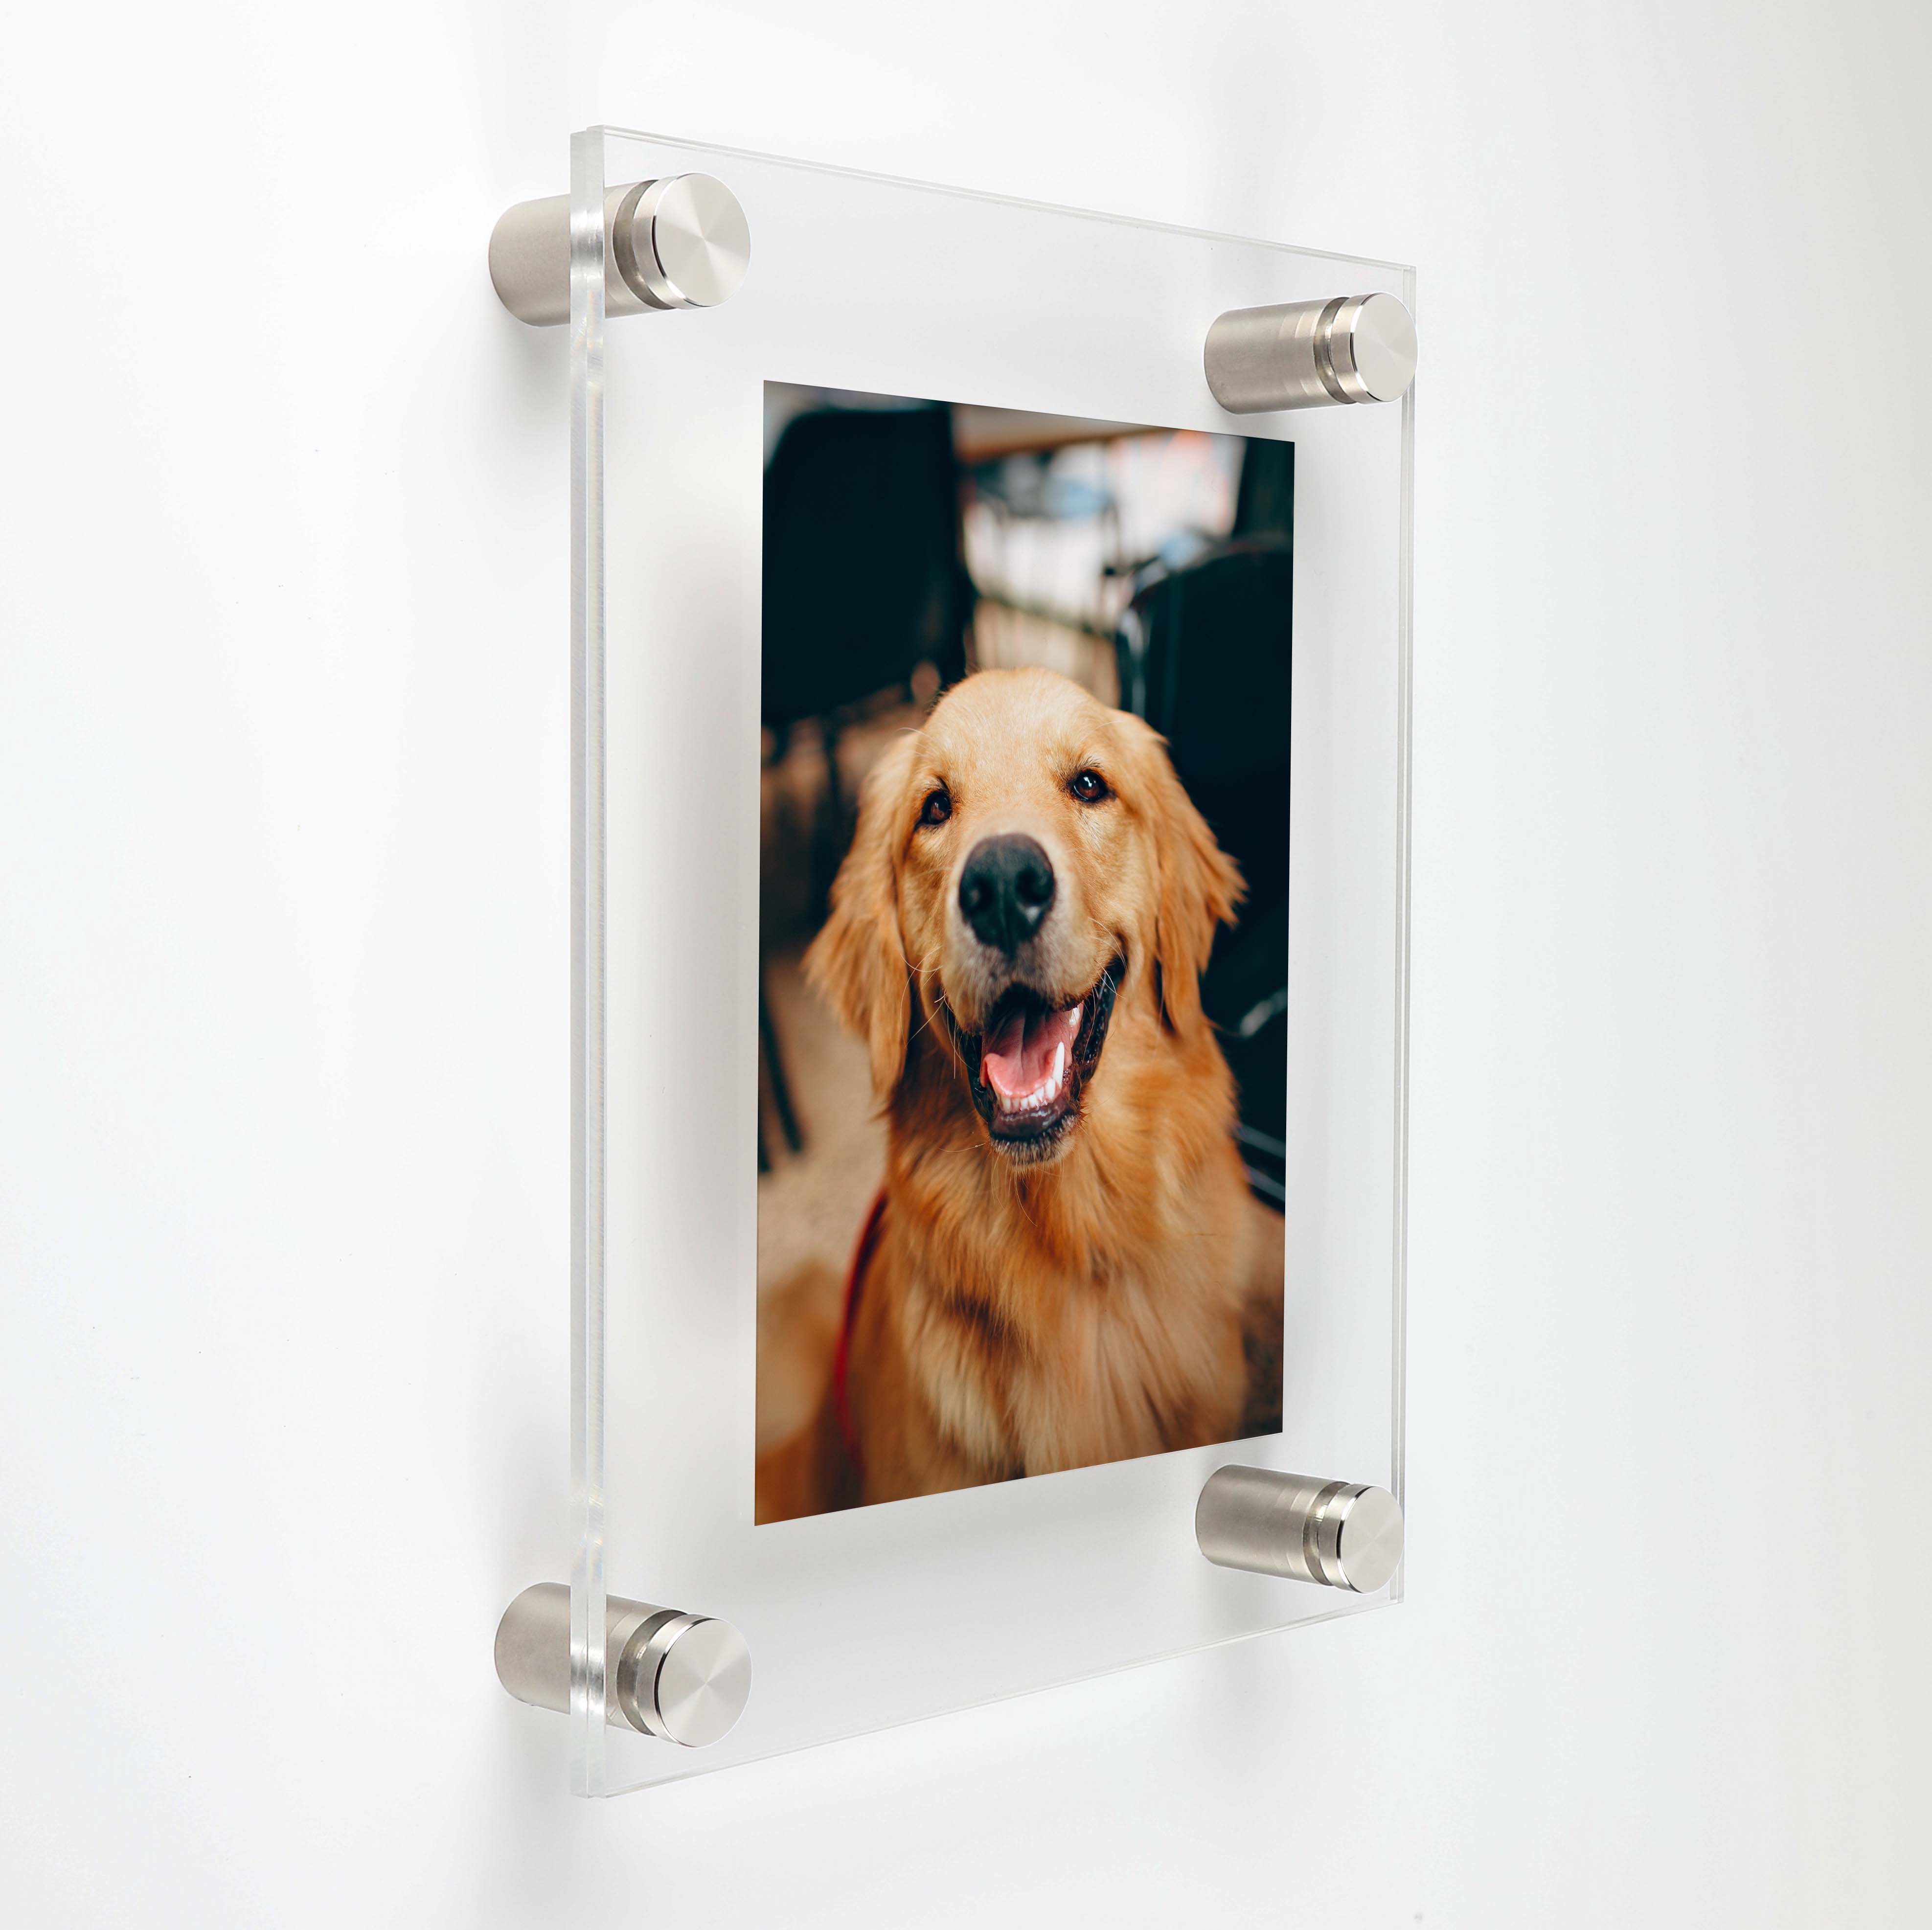 (2) 19-3/4'' x 26'' Clear Acrylics , Pre-Drilled With Polished Edges (Thick 3/16'' each), Wall Frame with (4) 5/8'' x 3/4'' Brushed Stainless Steel Standoffs includes Screws and Anchors